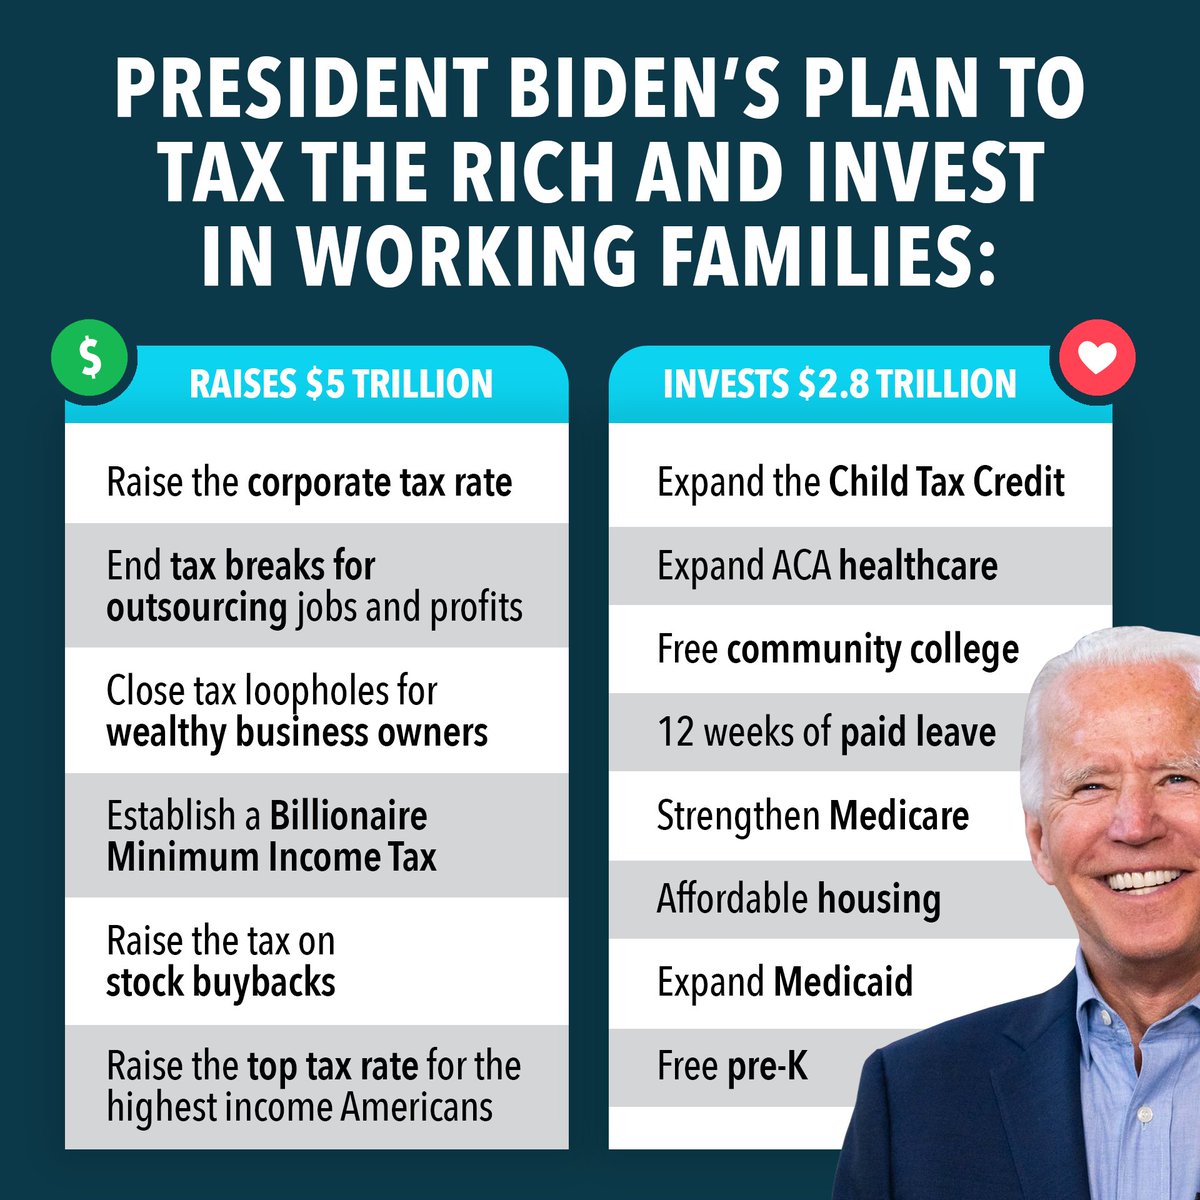 President Biden’s proposed budget raises $5 trillion to lower the deficit and make investments in working families by making the wealthy and corporations pay their fair share in taxes. #TaxDay2023